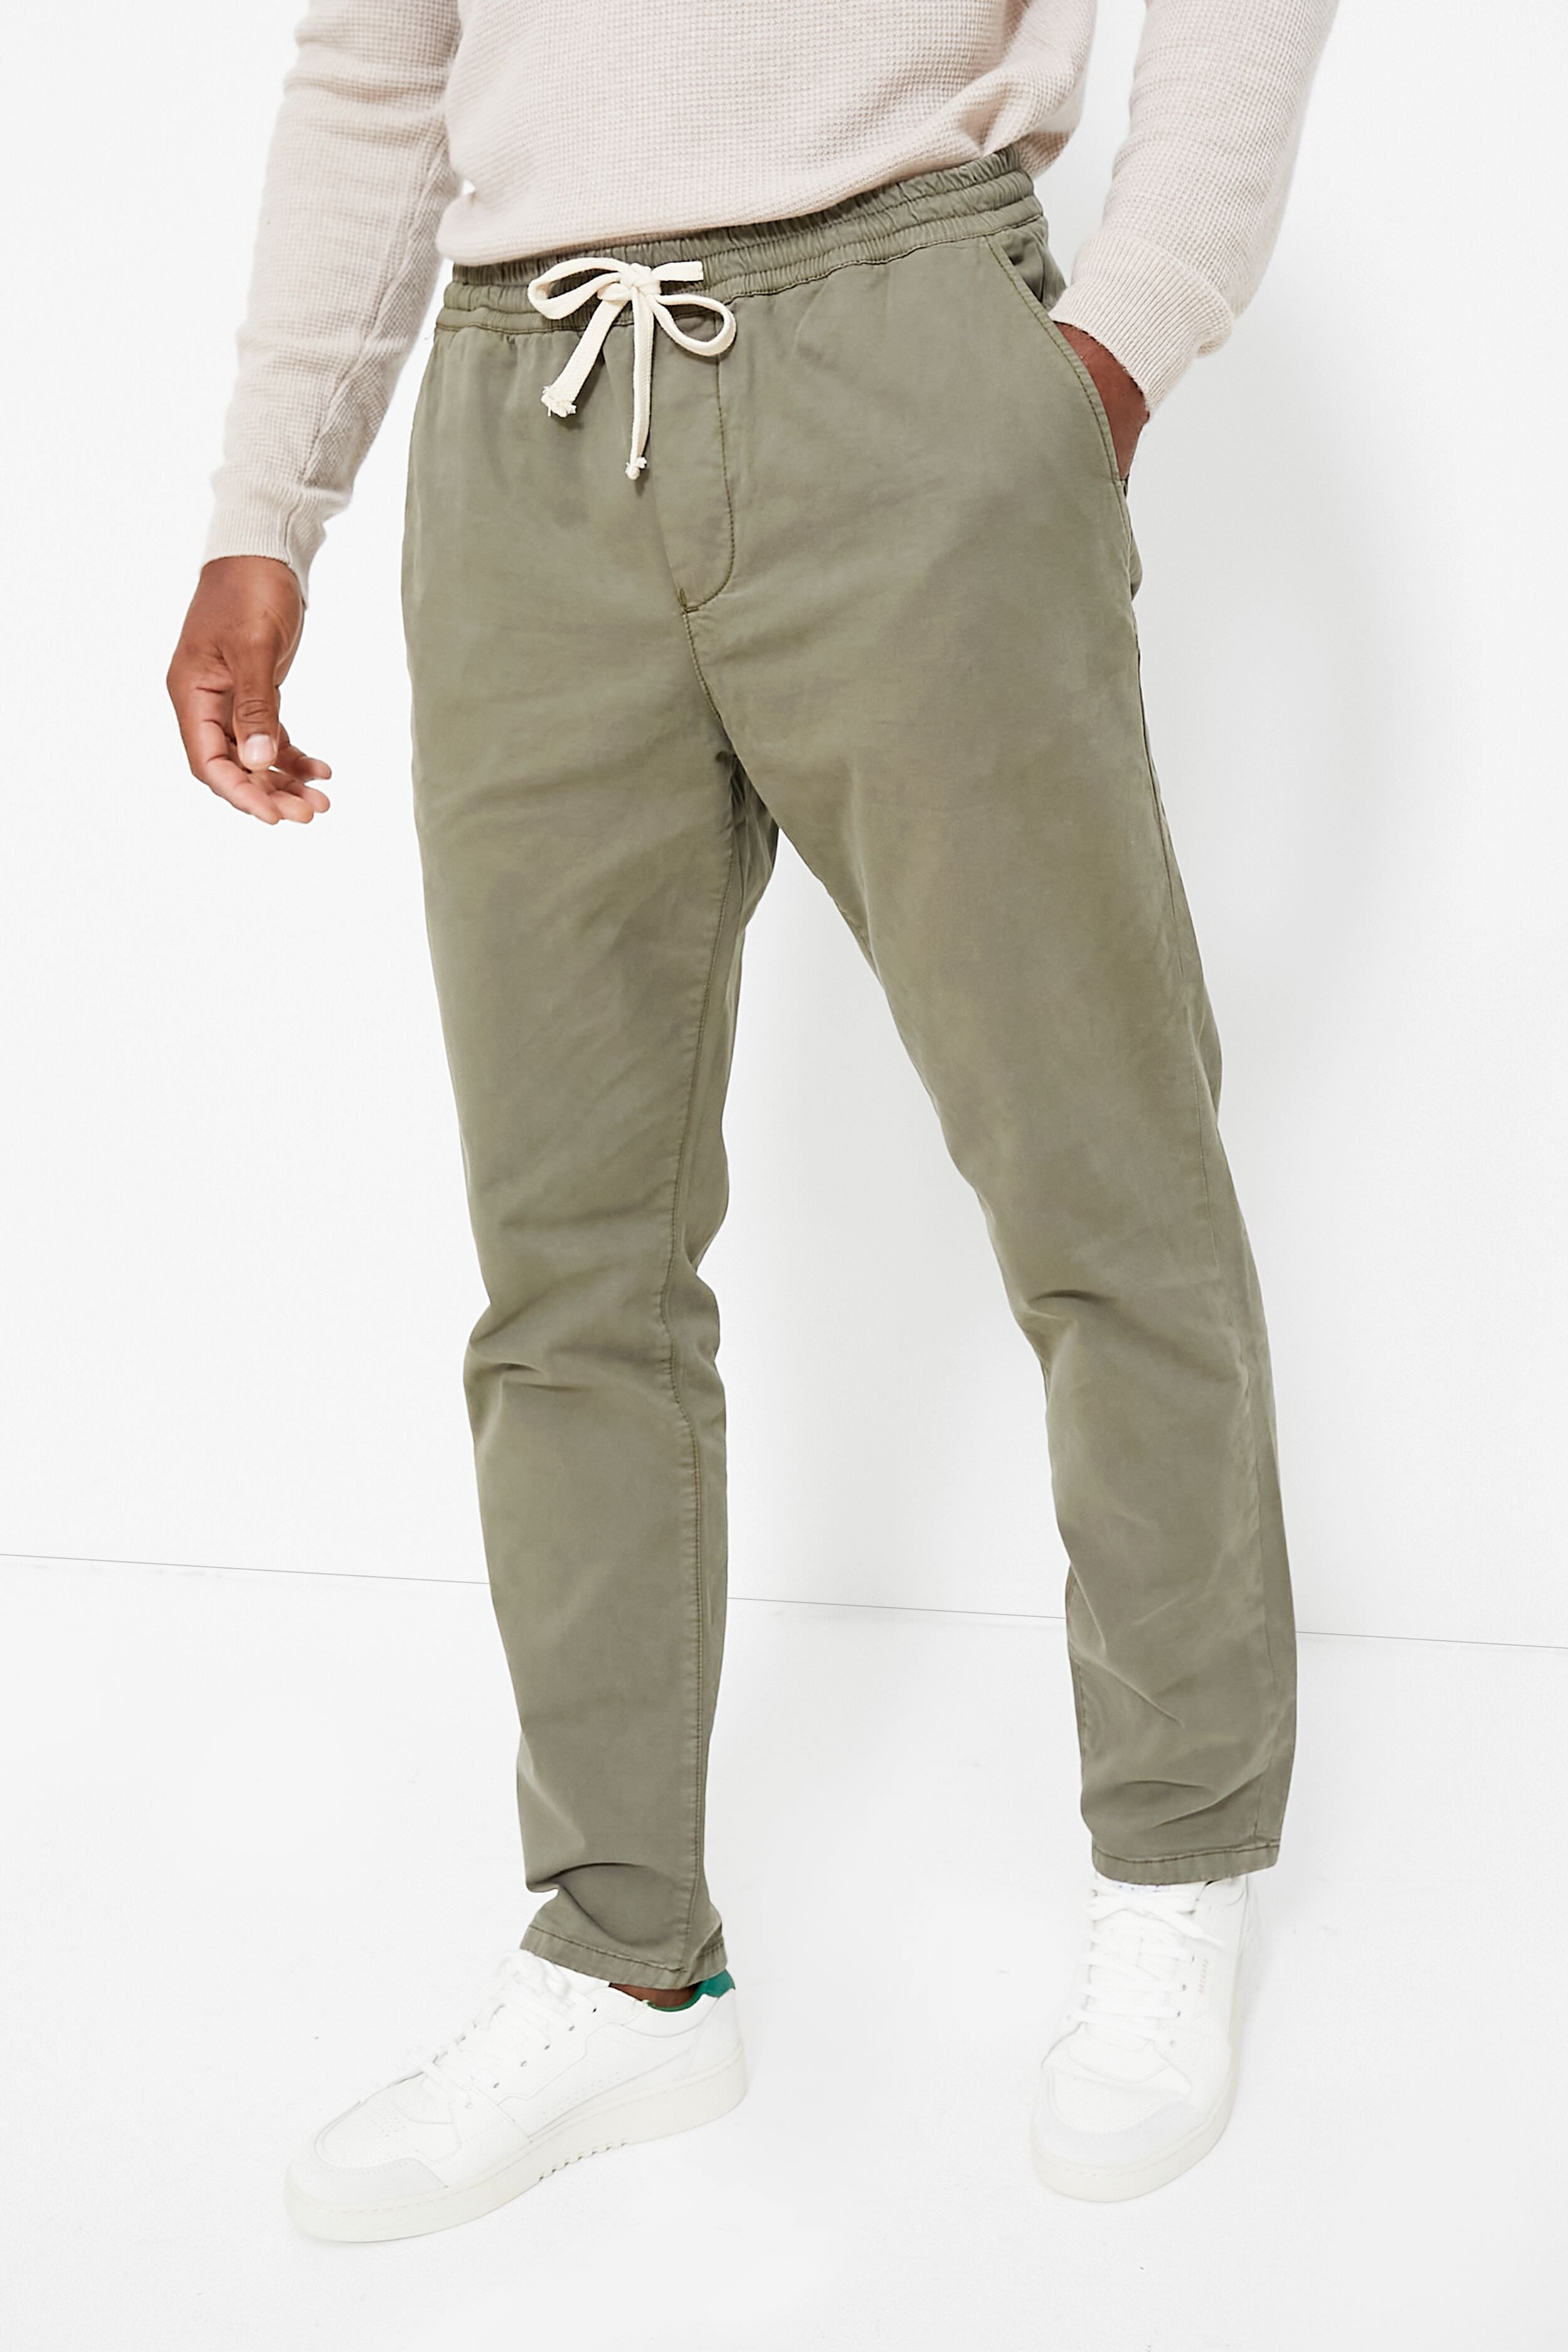 Marine Layer Athletic Fit Five Pocket Stretch Twill Pants